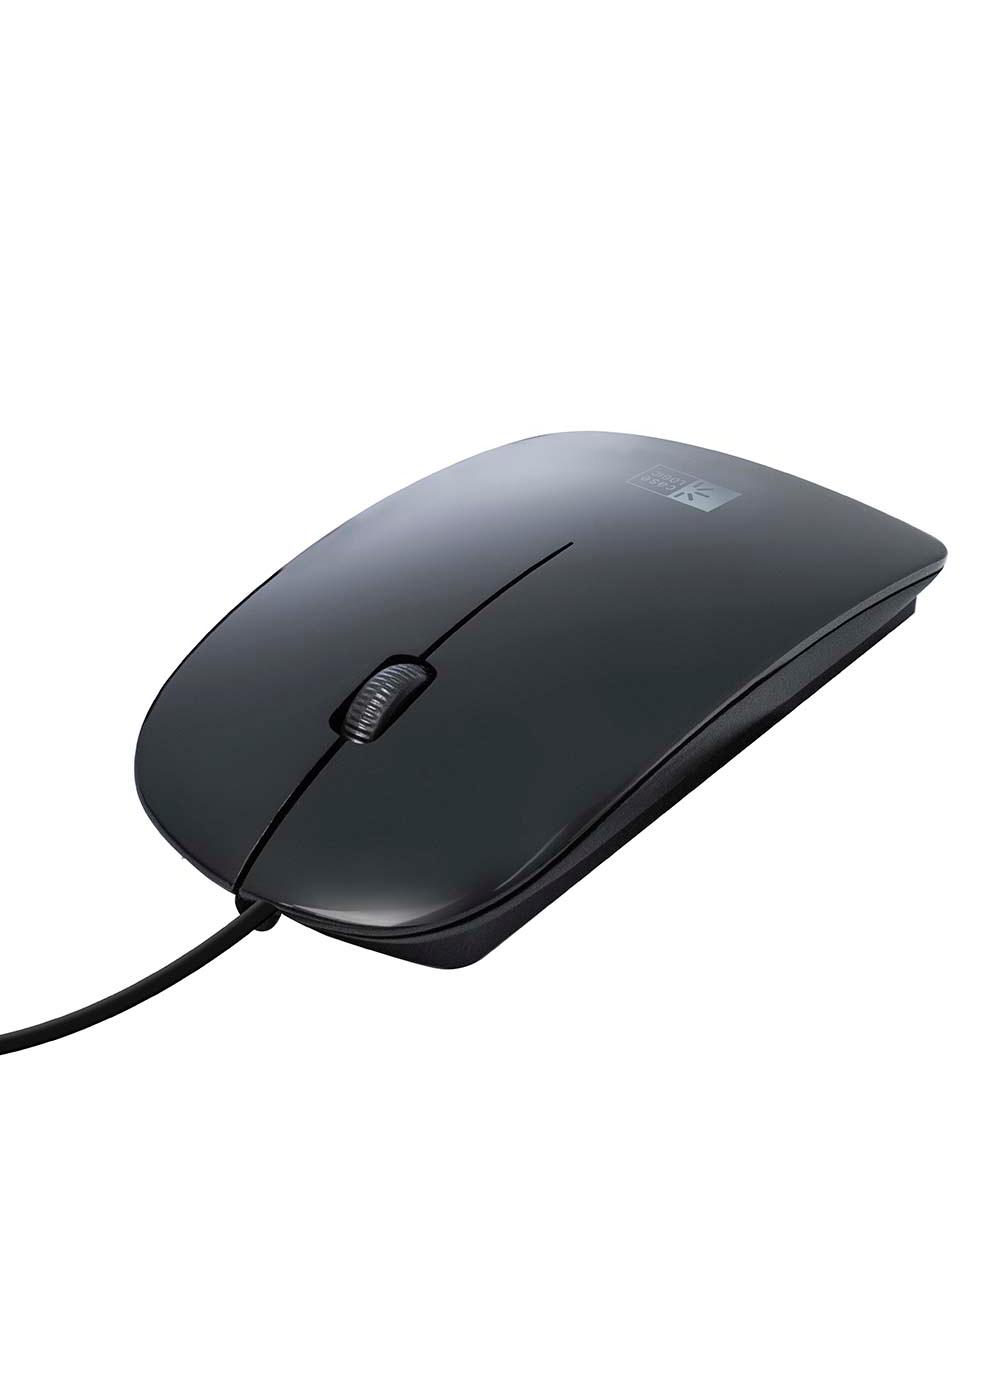 Case Logic Wired Optical Mouse - Black; image 2 of 2